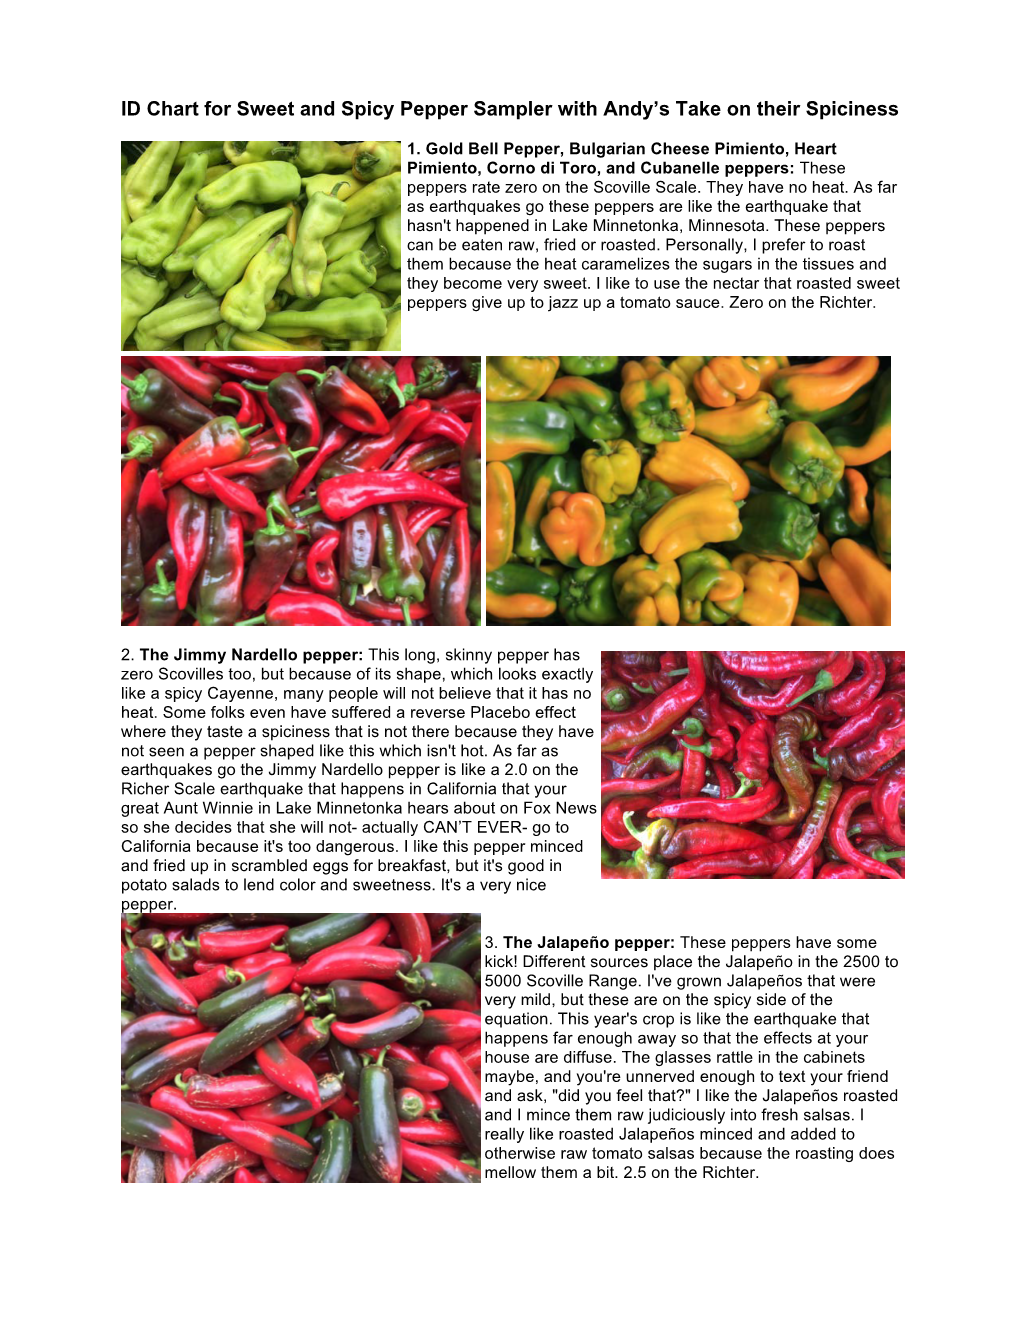 ID Chart for Sweet and Spicy Pepper Sampler with Andy's Take on Their Spiciness